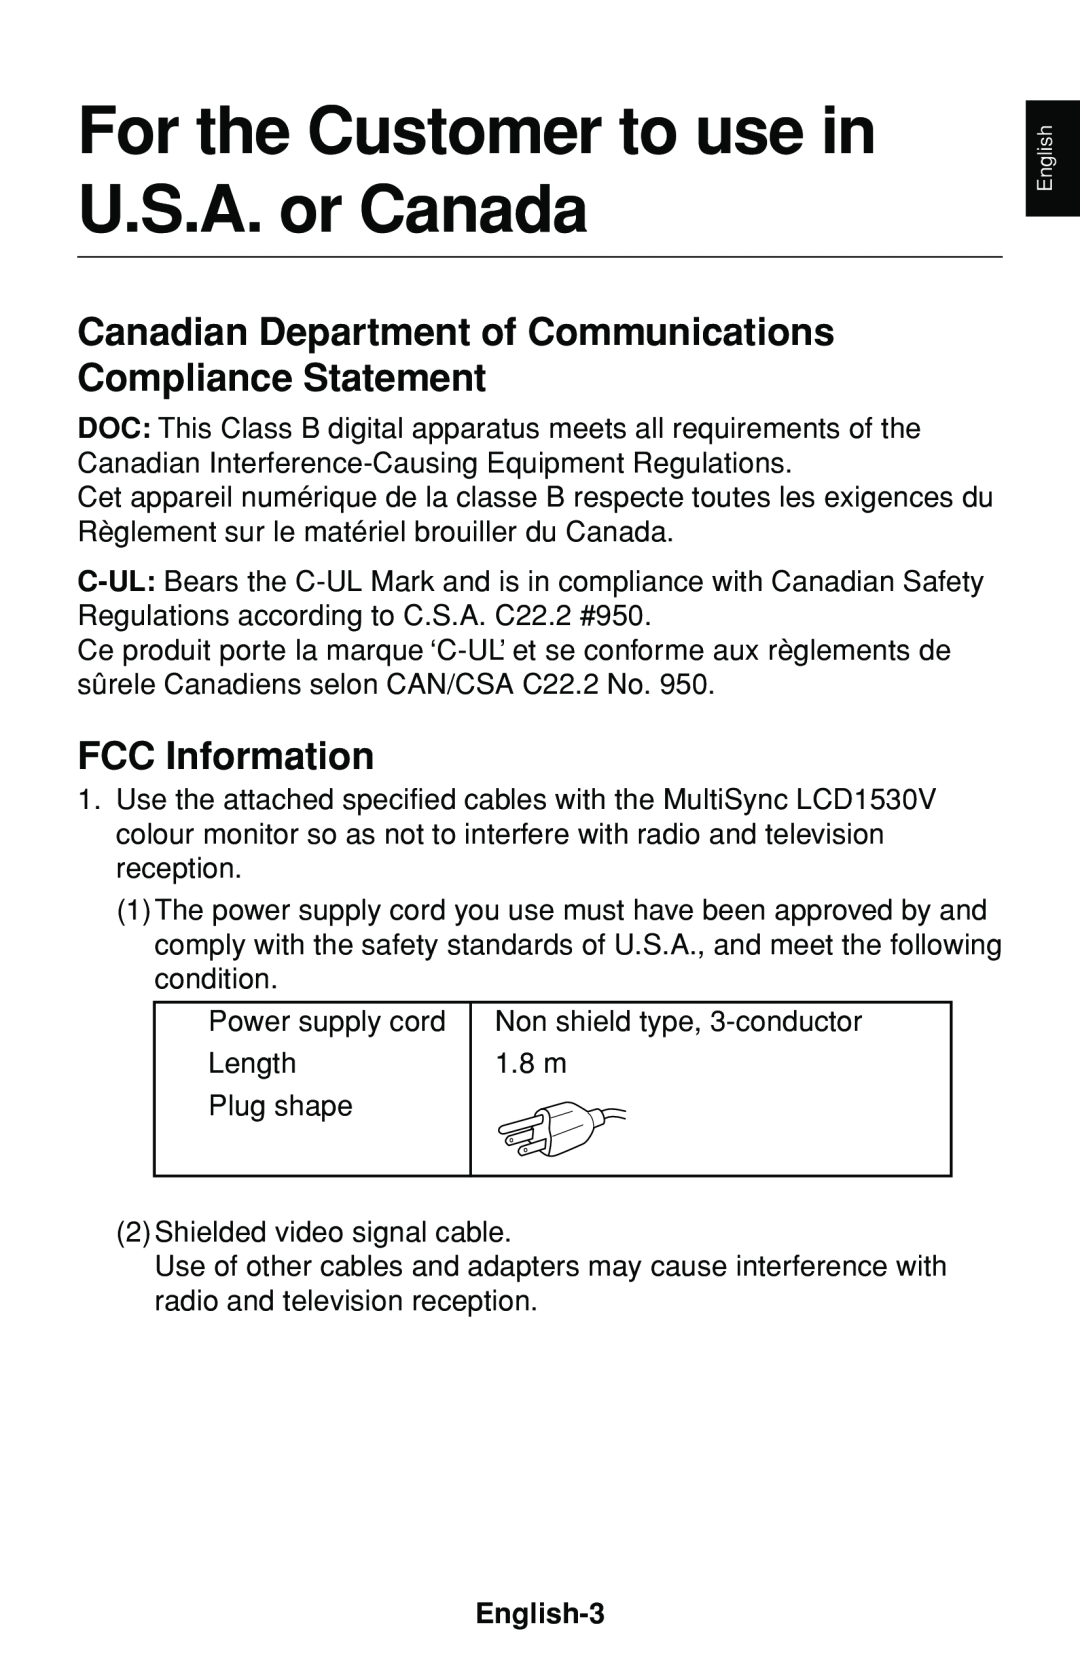 NEC LCD1530V user manual For the Customer to use in U.S.A. or Canada, FCC Information 